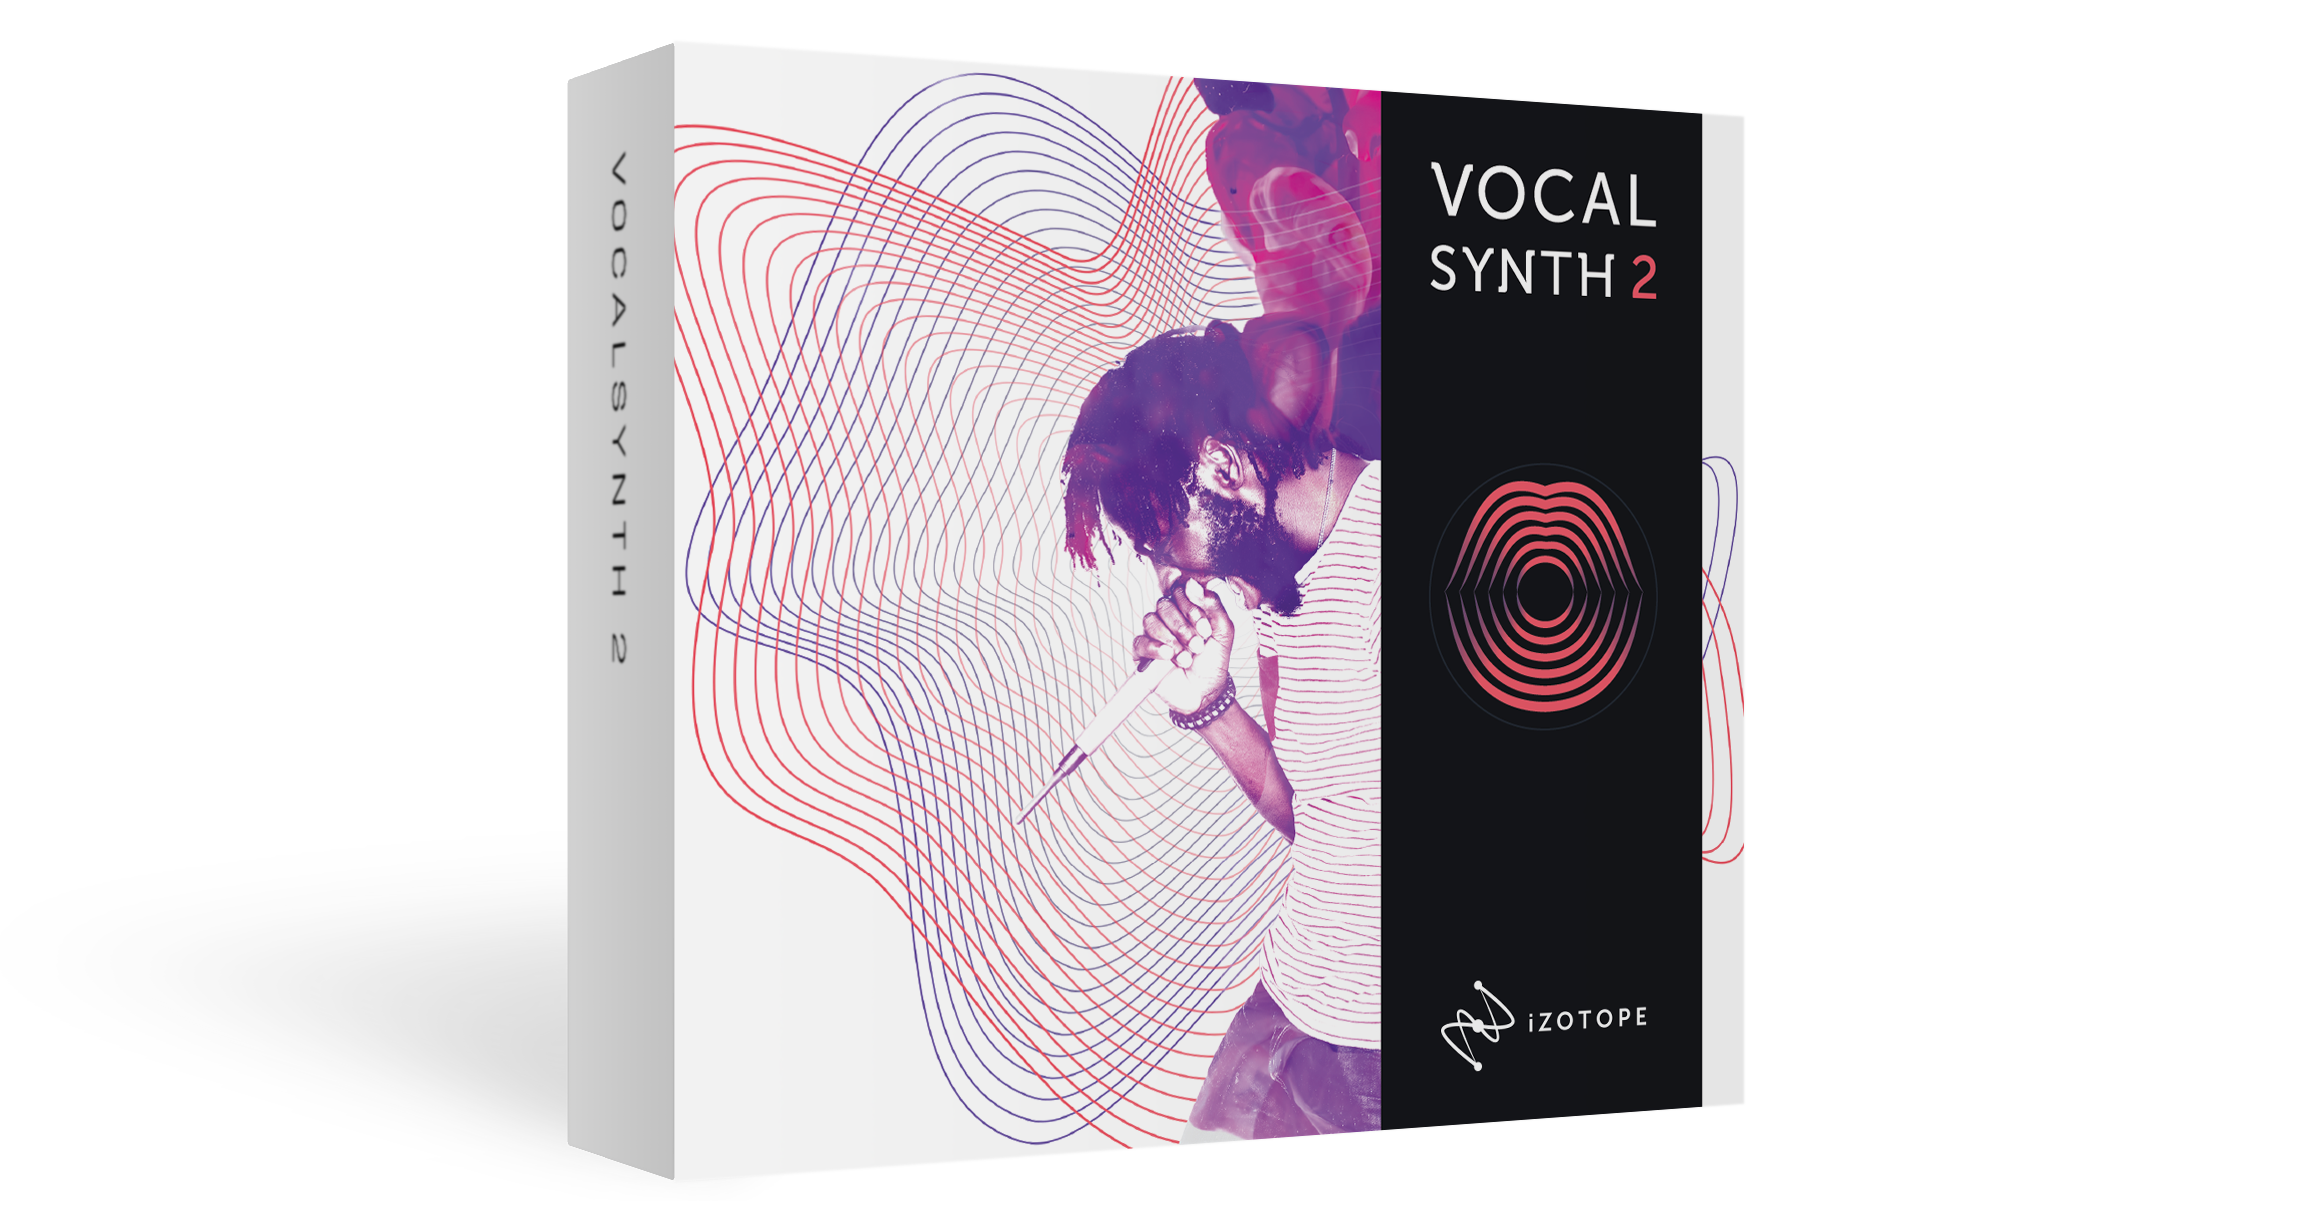 iZotope Music Production Suite Crossgrade from Tonal Balance Control 2